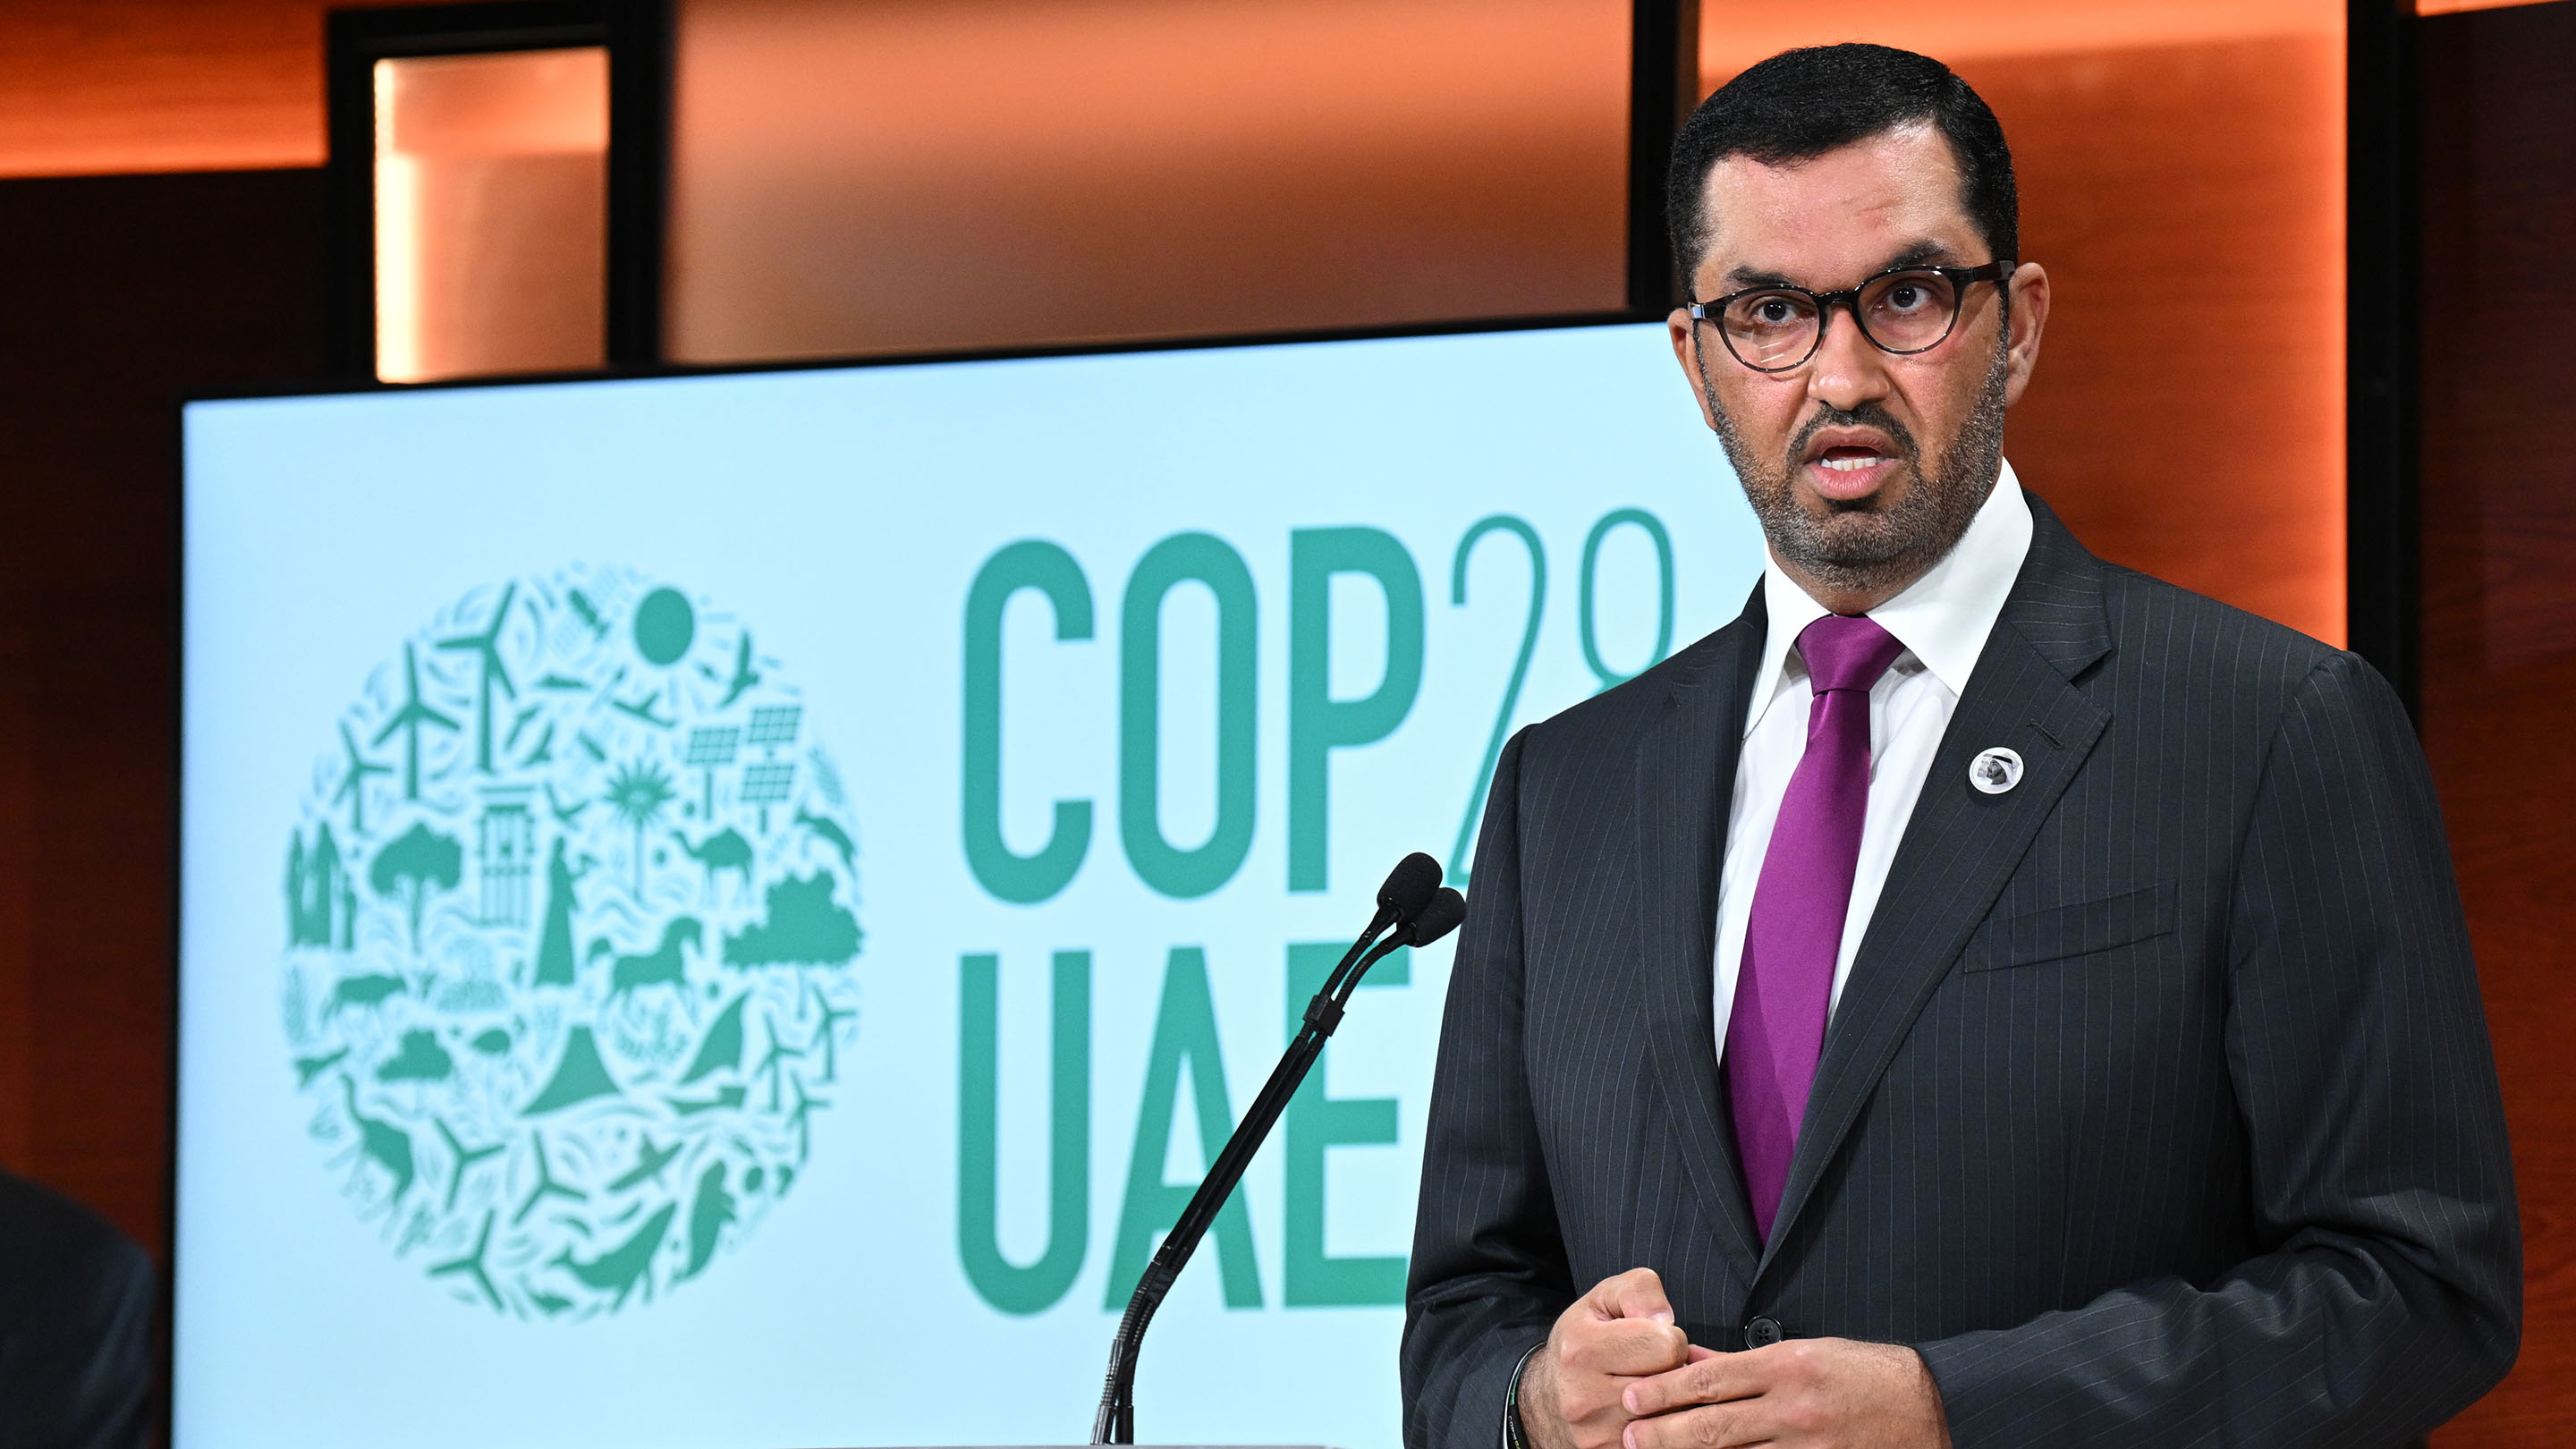 Don't expect CoP-28 to make real progress against climate change